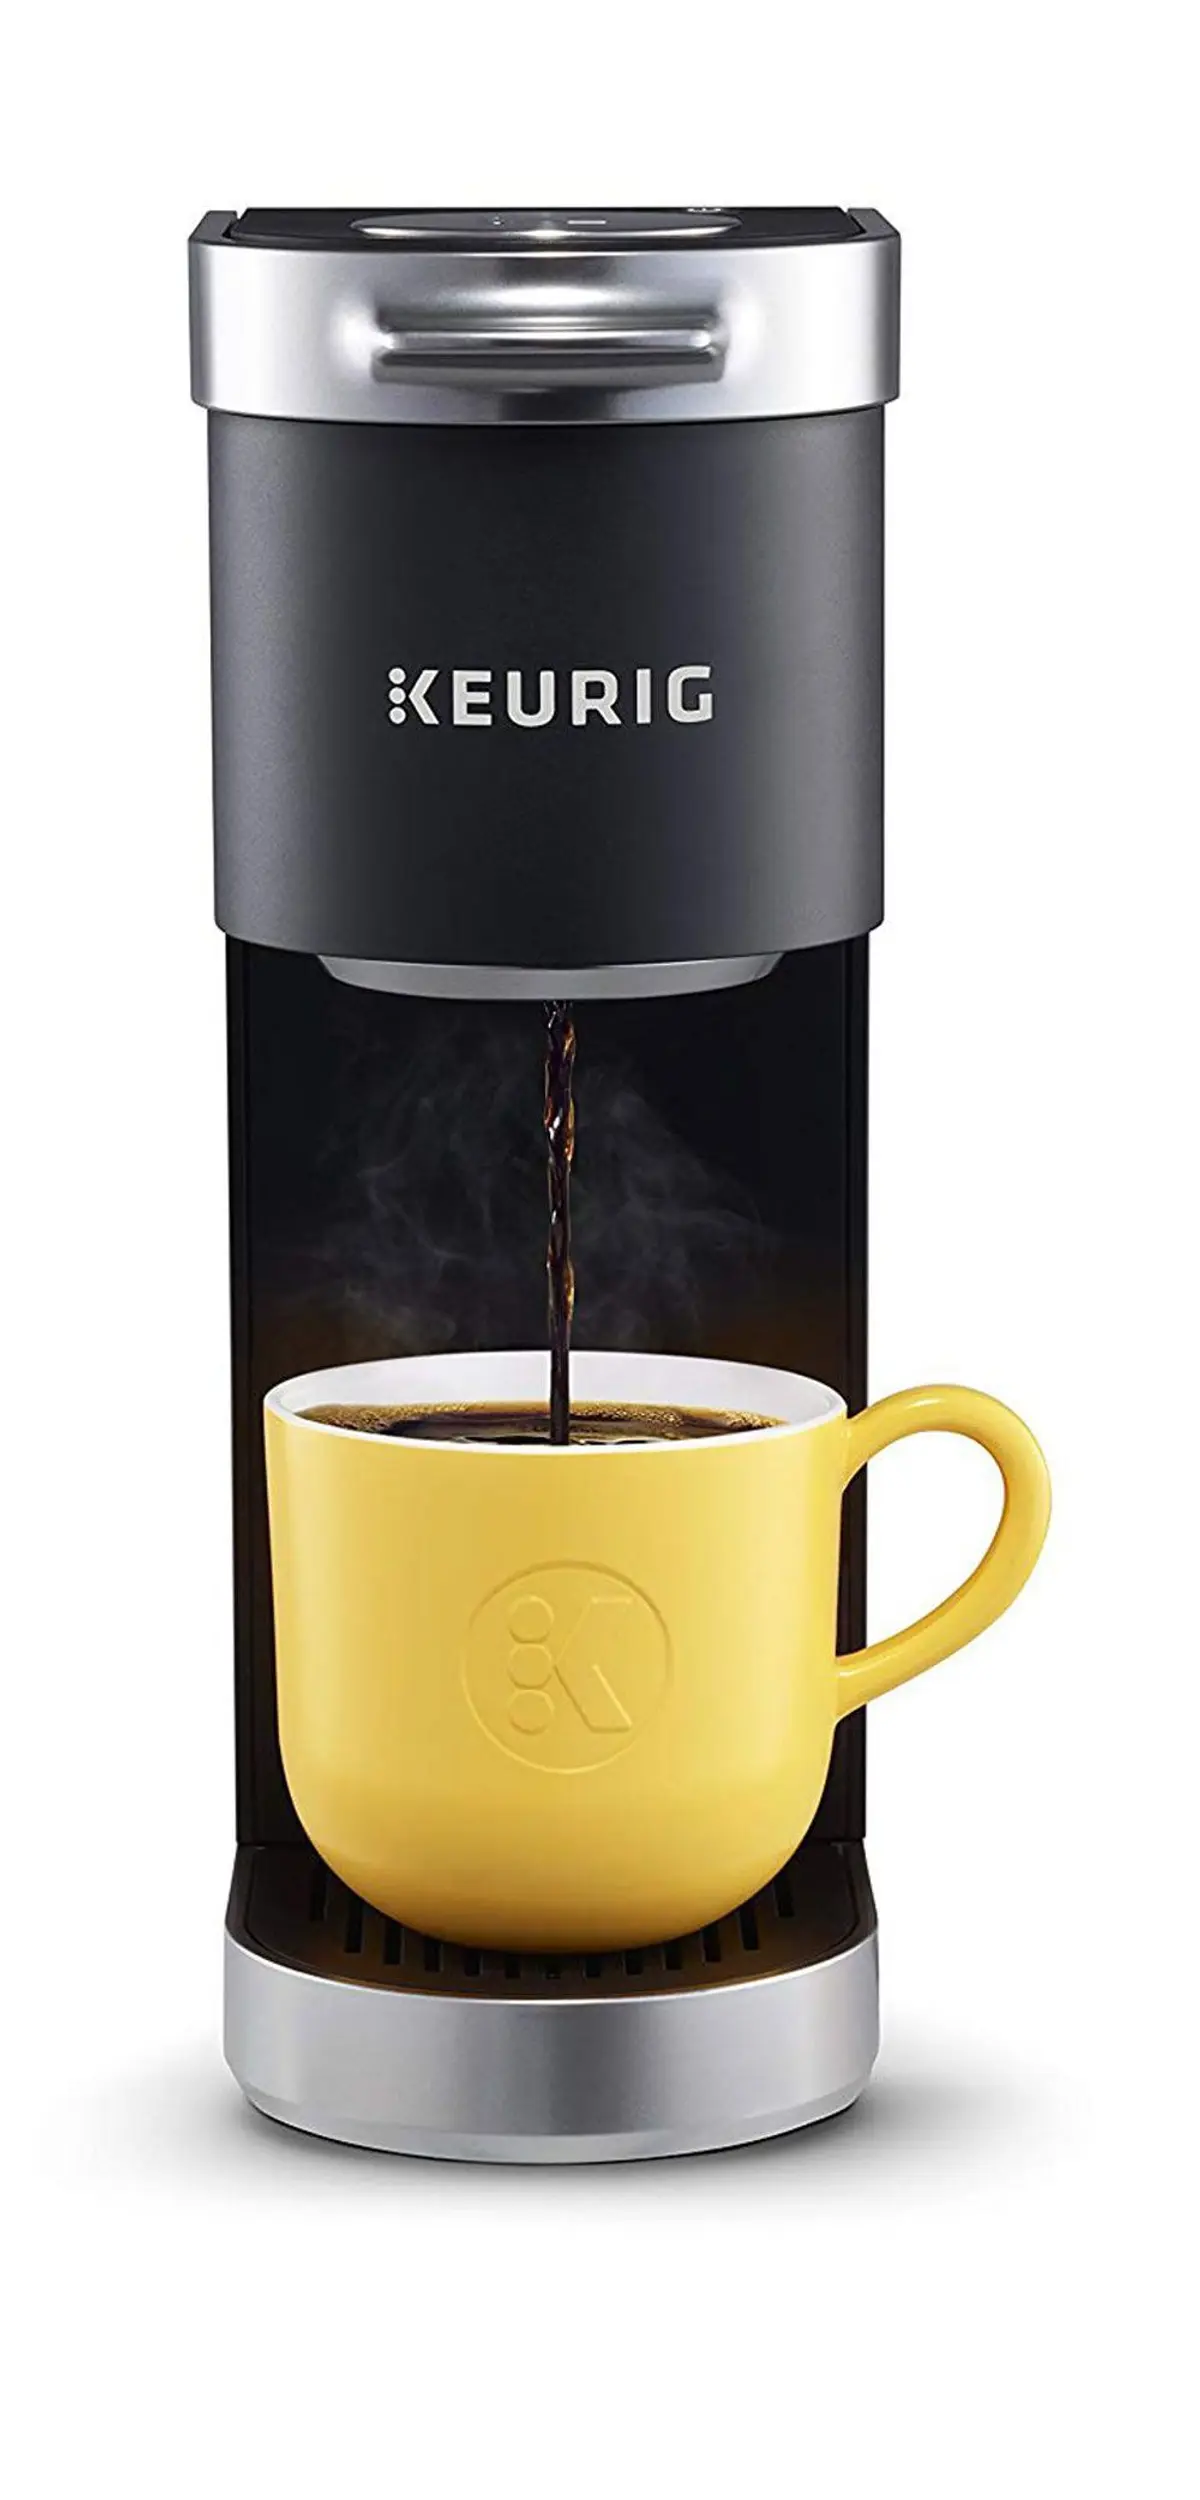 How to Make Iced Coffee with Keurig Coffee Maker